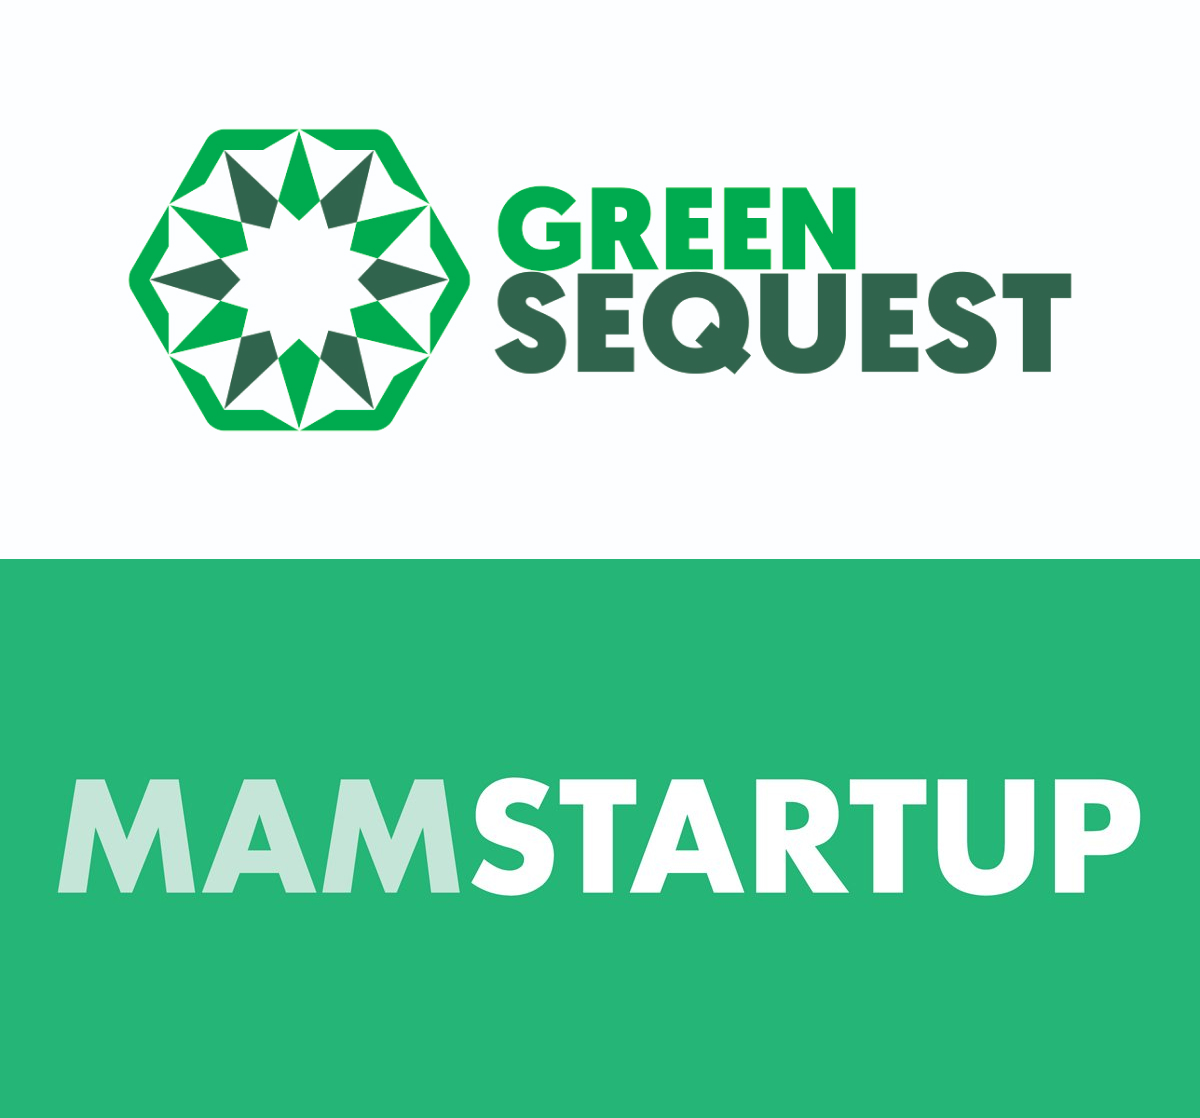 Interview with Adrian Podgórny, COO of Green Sequest on MamStartup